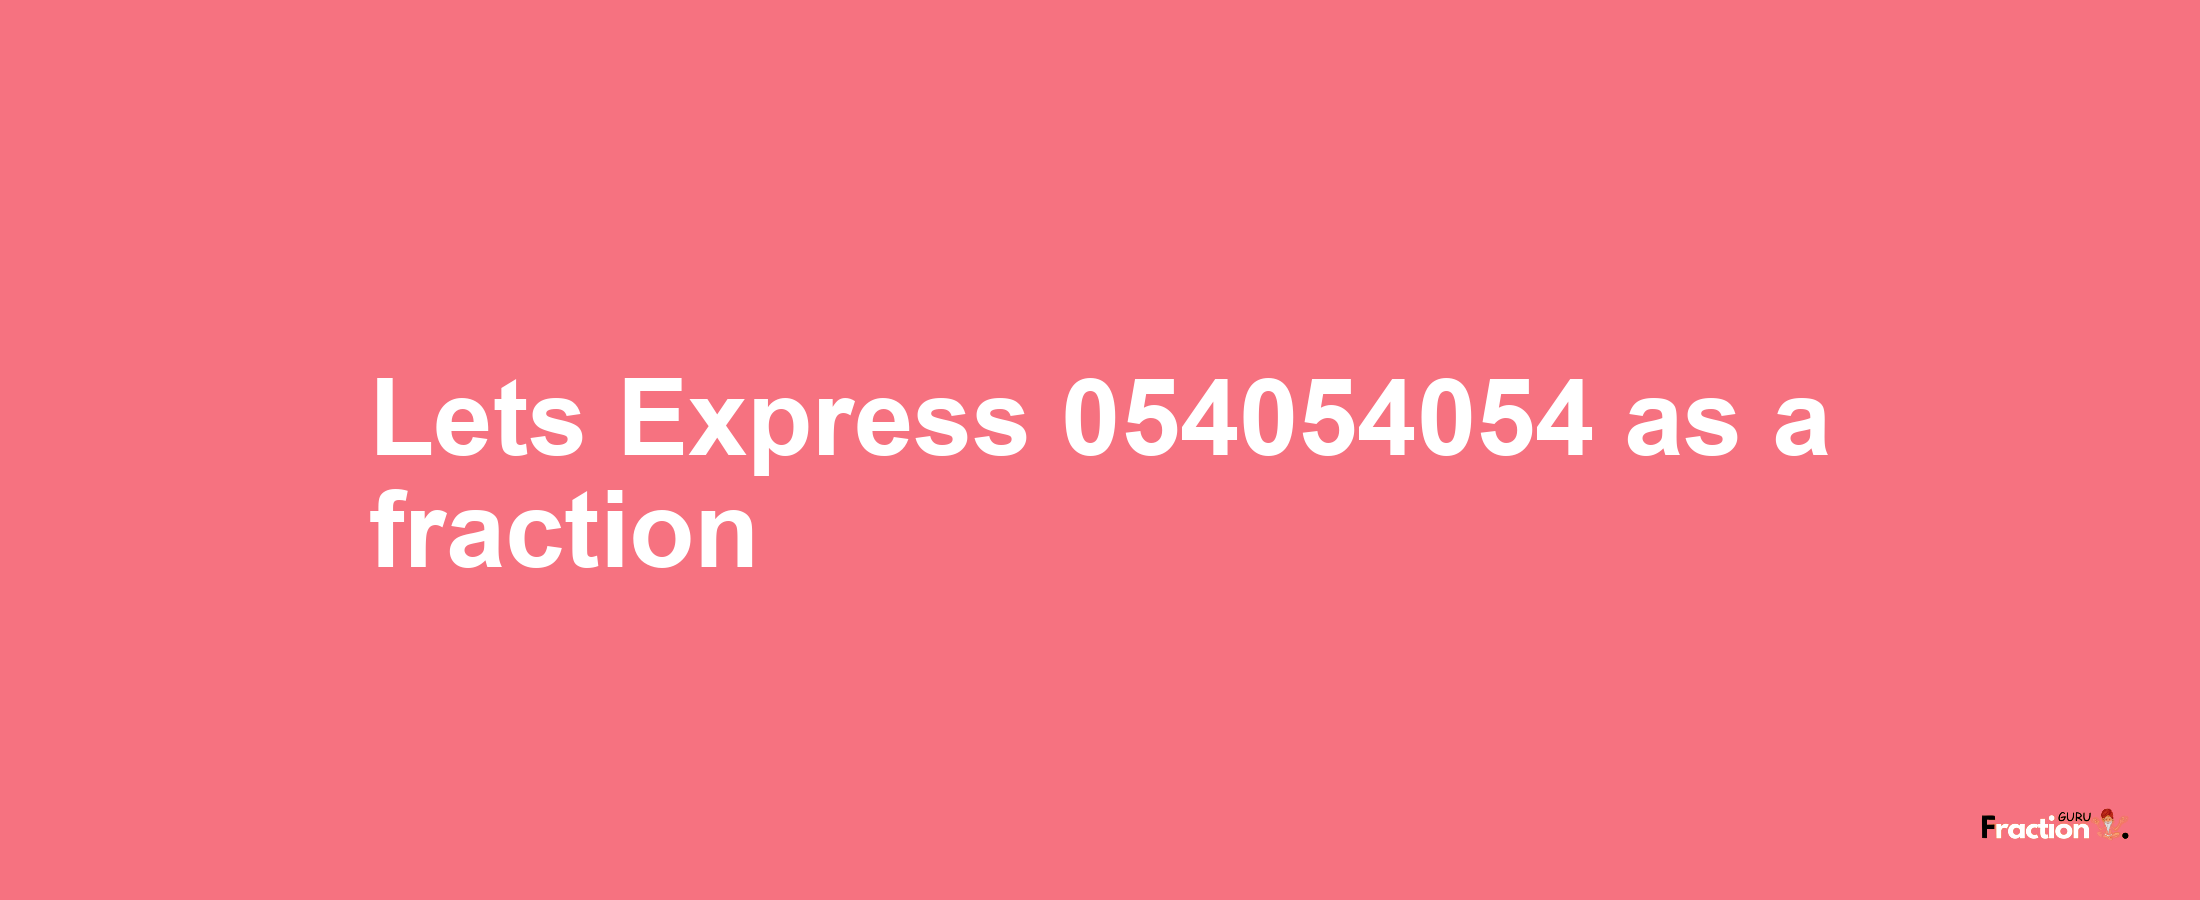 Lets Express 054054054 as afraction